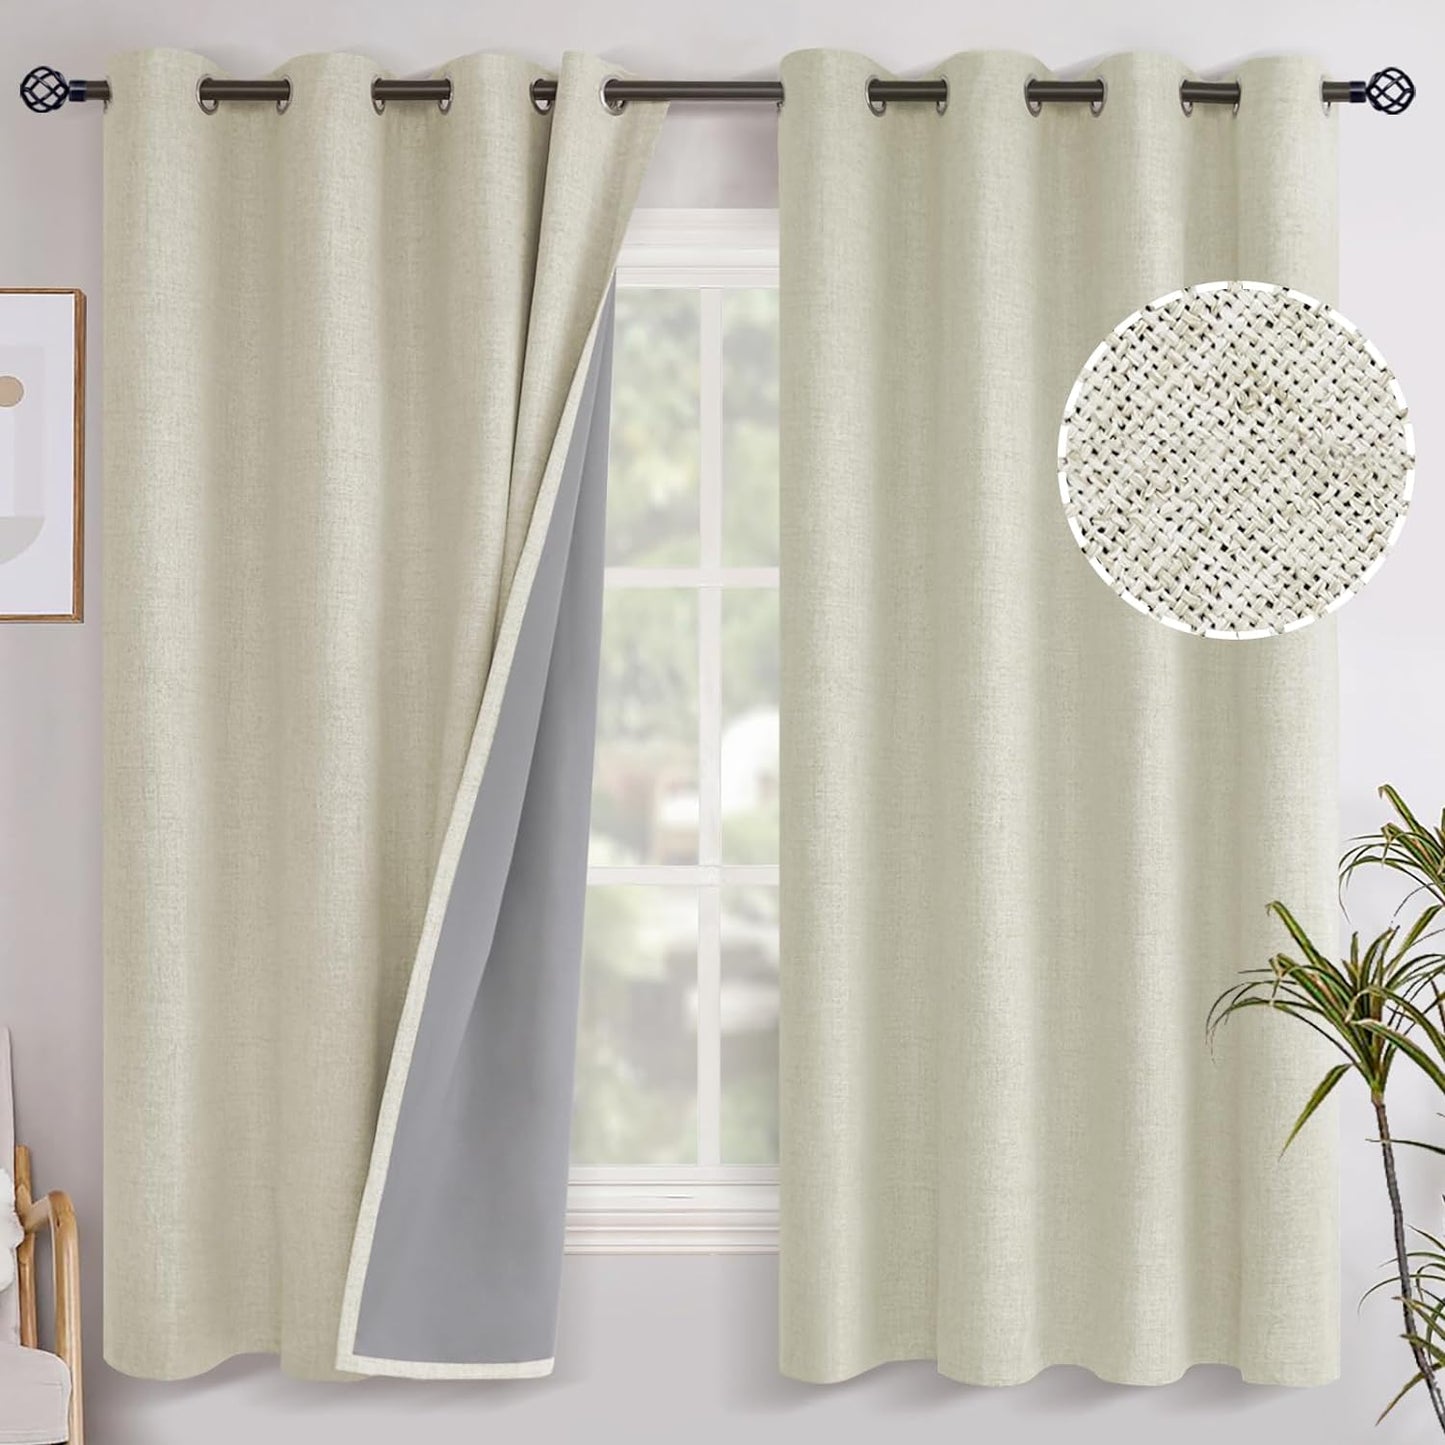 Youngstex Linen Blackout Curtains 63 Inch Length, Grommet Darkening Bedroom Curtains Burlap Linen Window Drapes Thermal Insulated for Basement Summer Heat, 2 Panels, 52 X 63 Inch, Beige  YoungsTex Cream 52W X 63L 